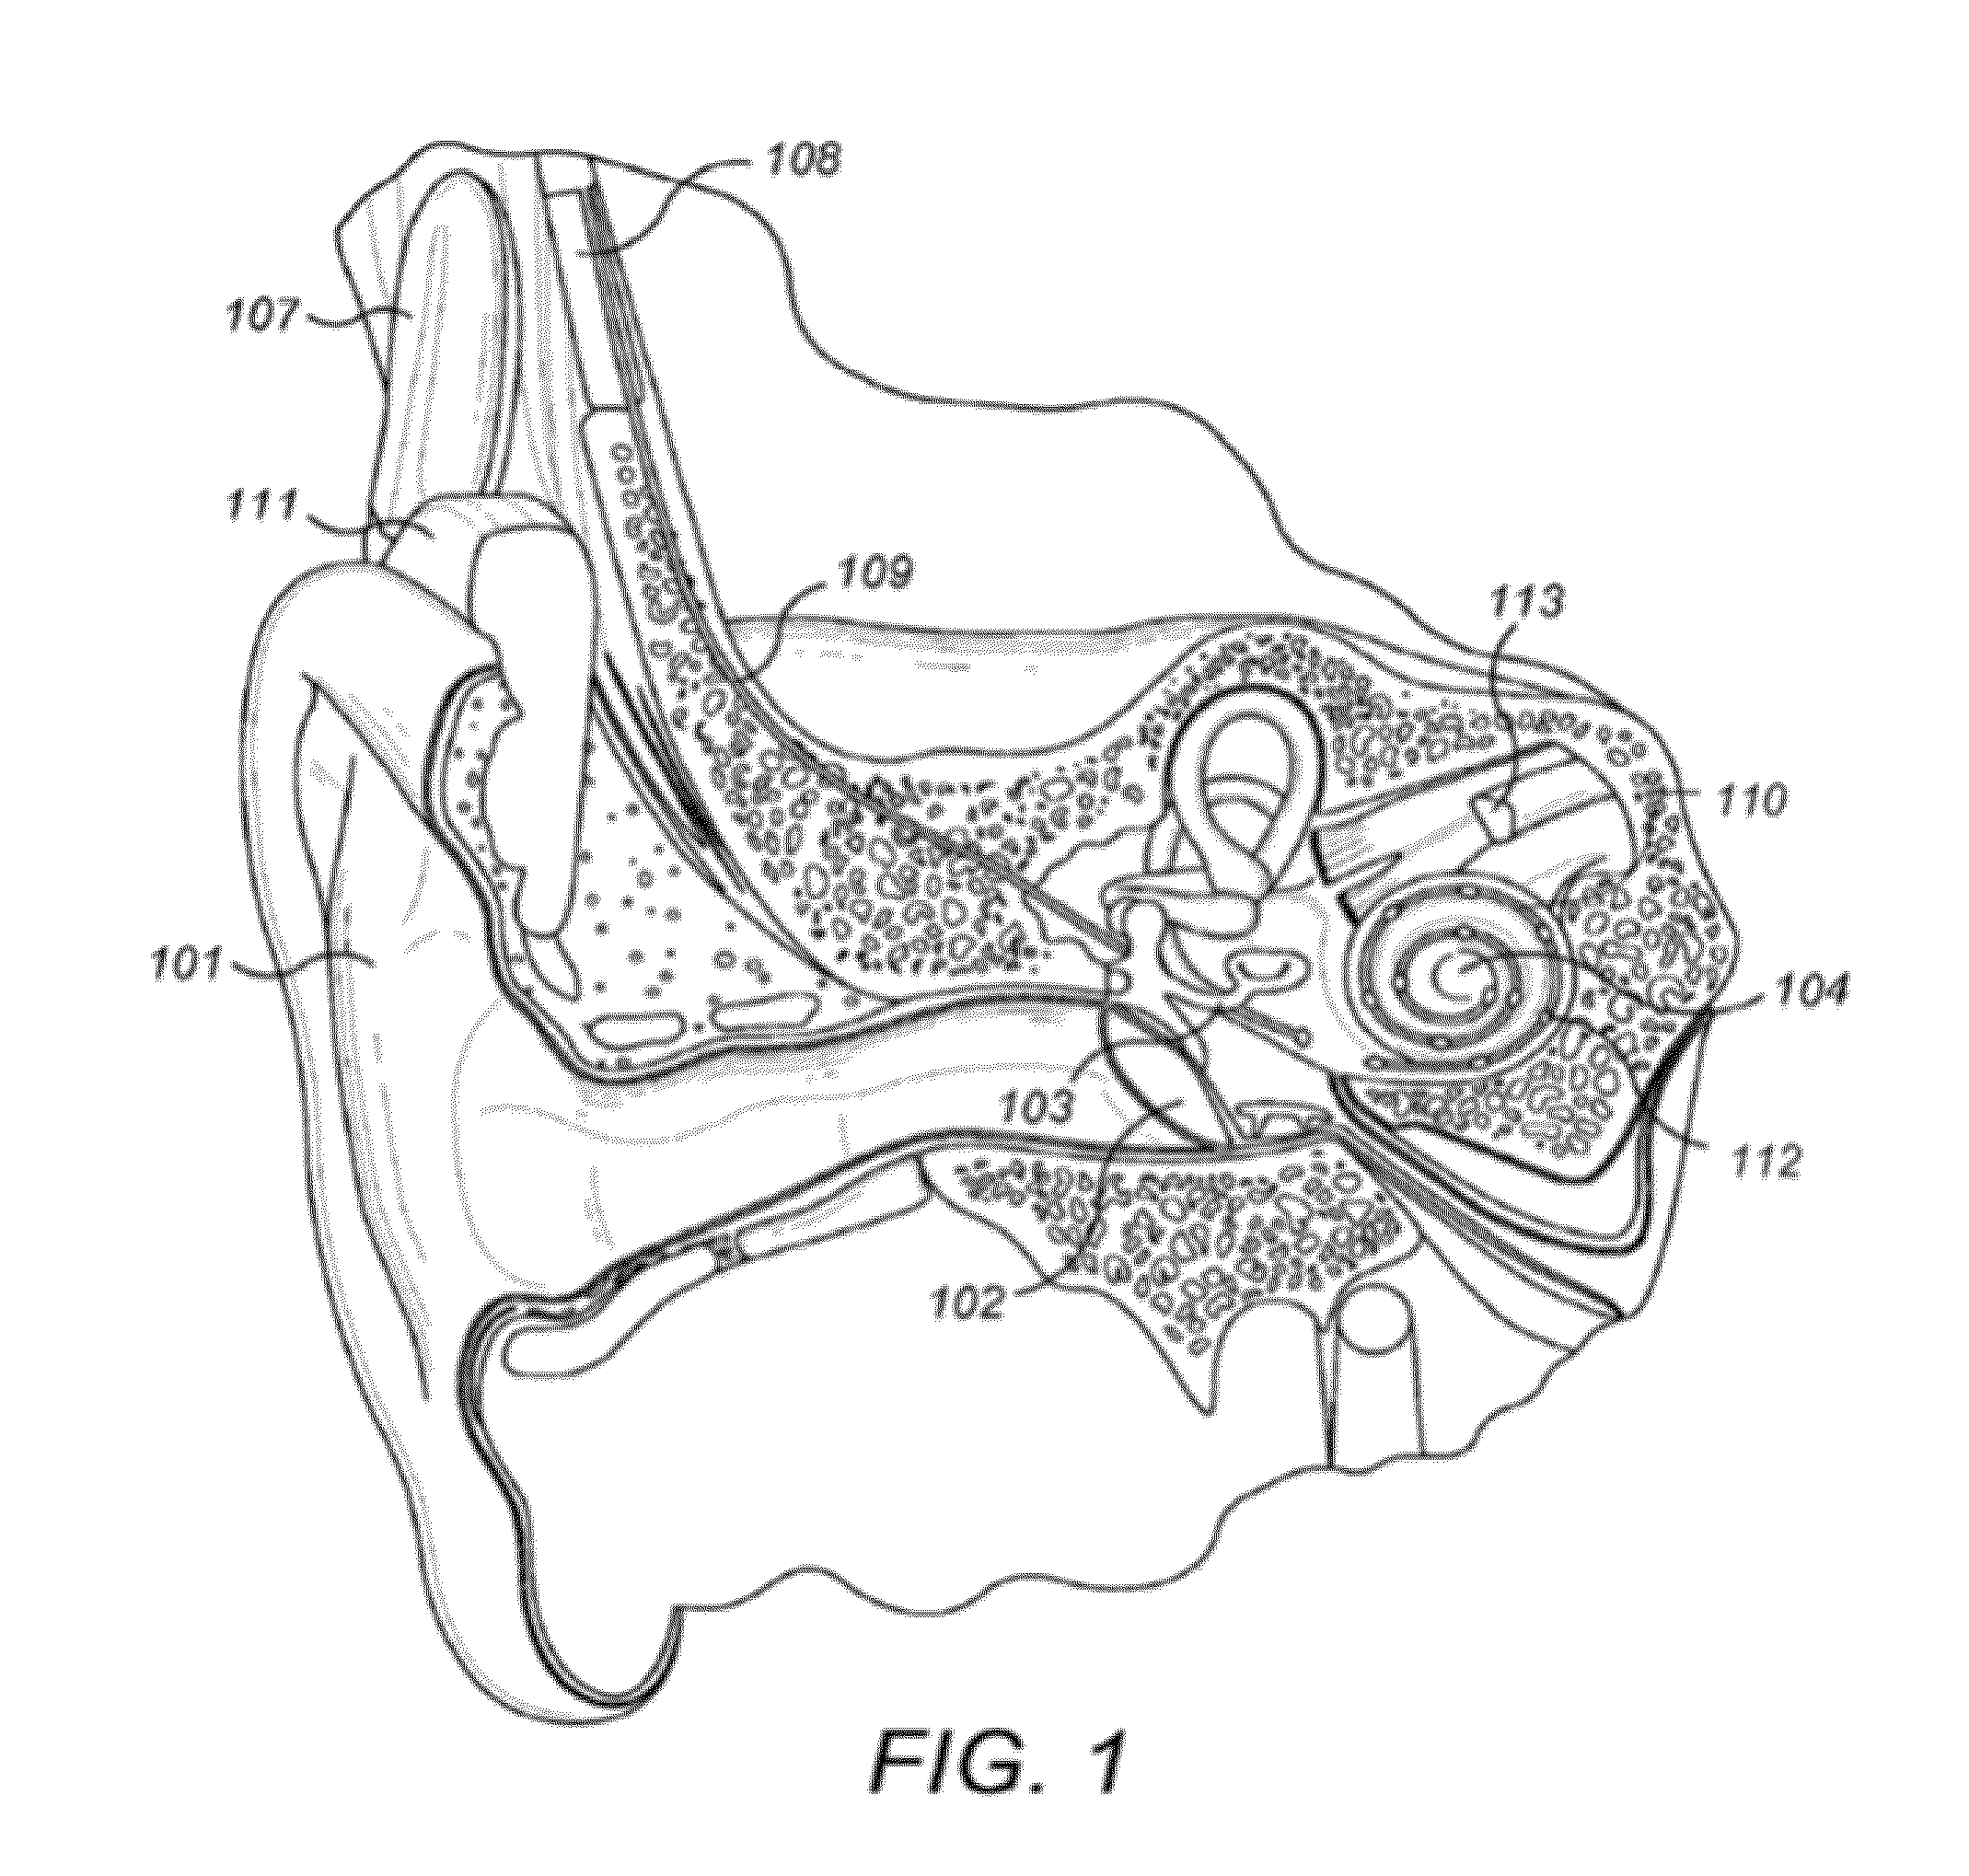 Automatic Selection of Reduction or Enhancement of Transient Sounds